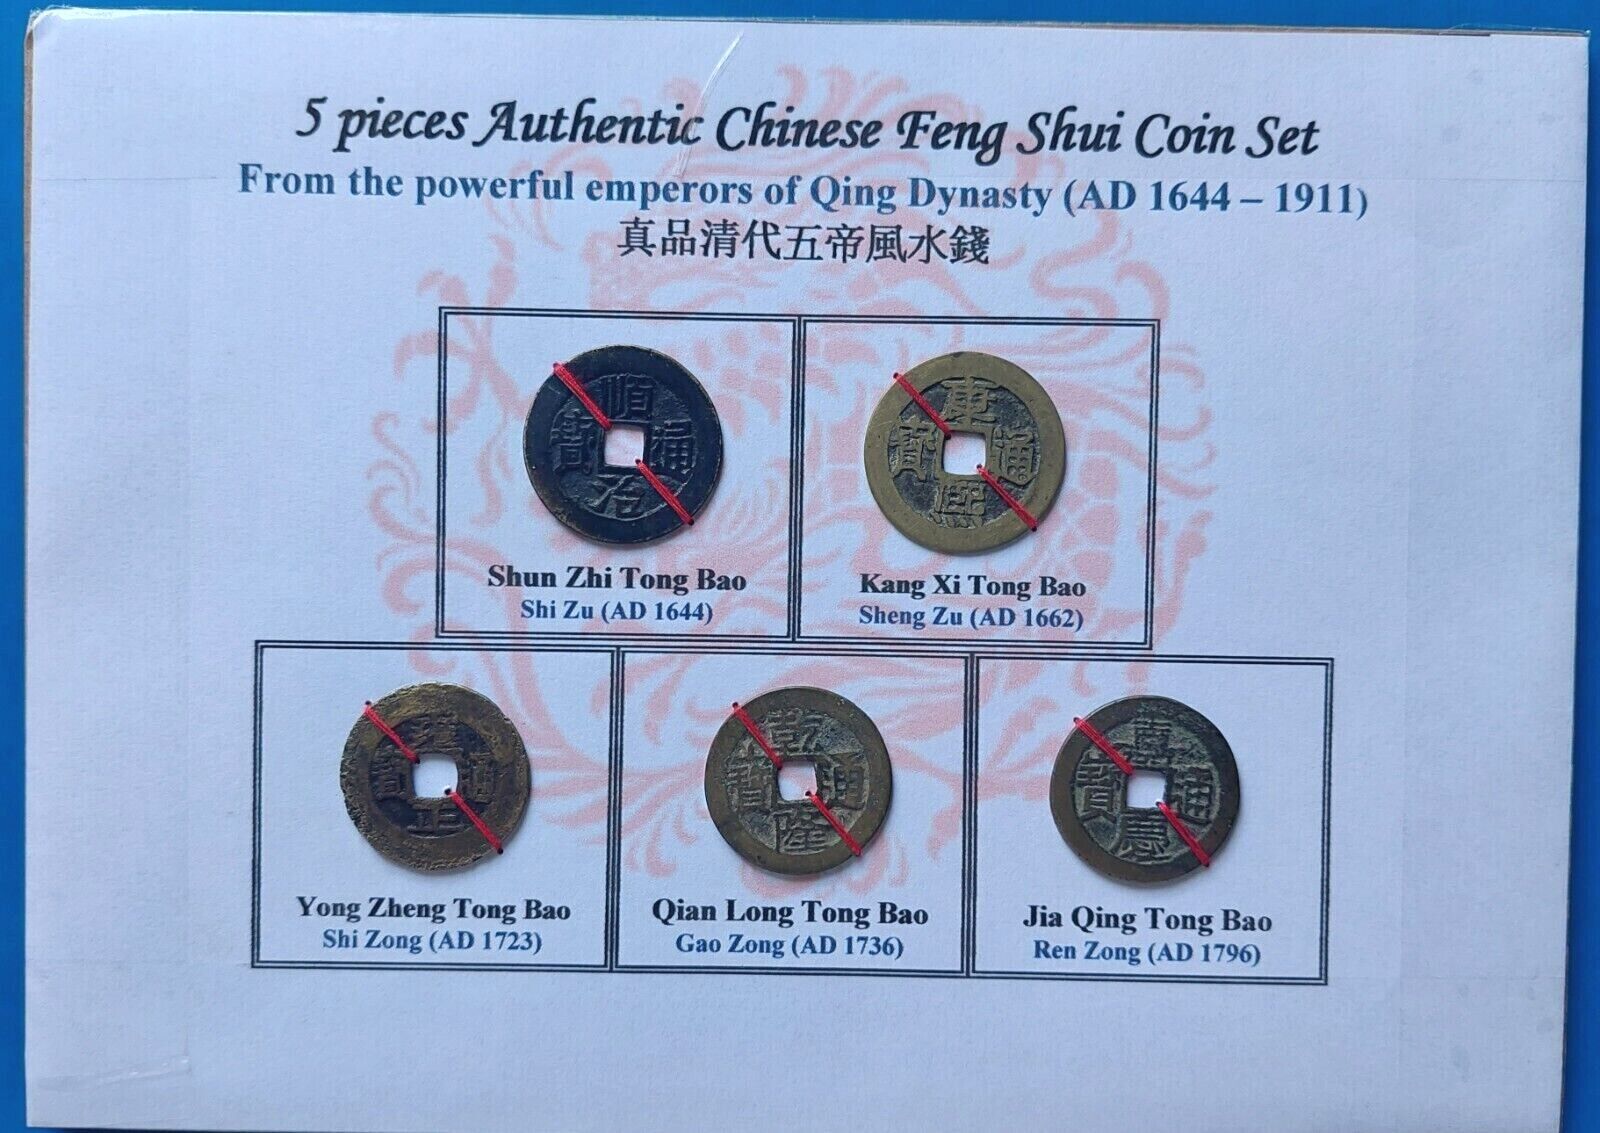 China, Qing 5-emperor Authentic Feng Shui Coin Set. 清代真品五帝風水錢